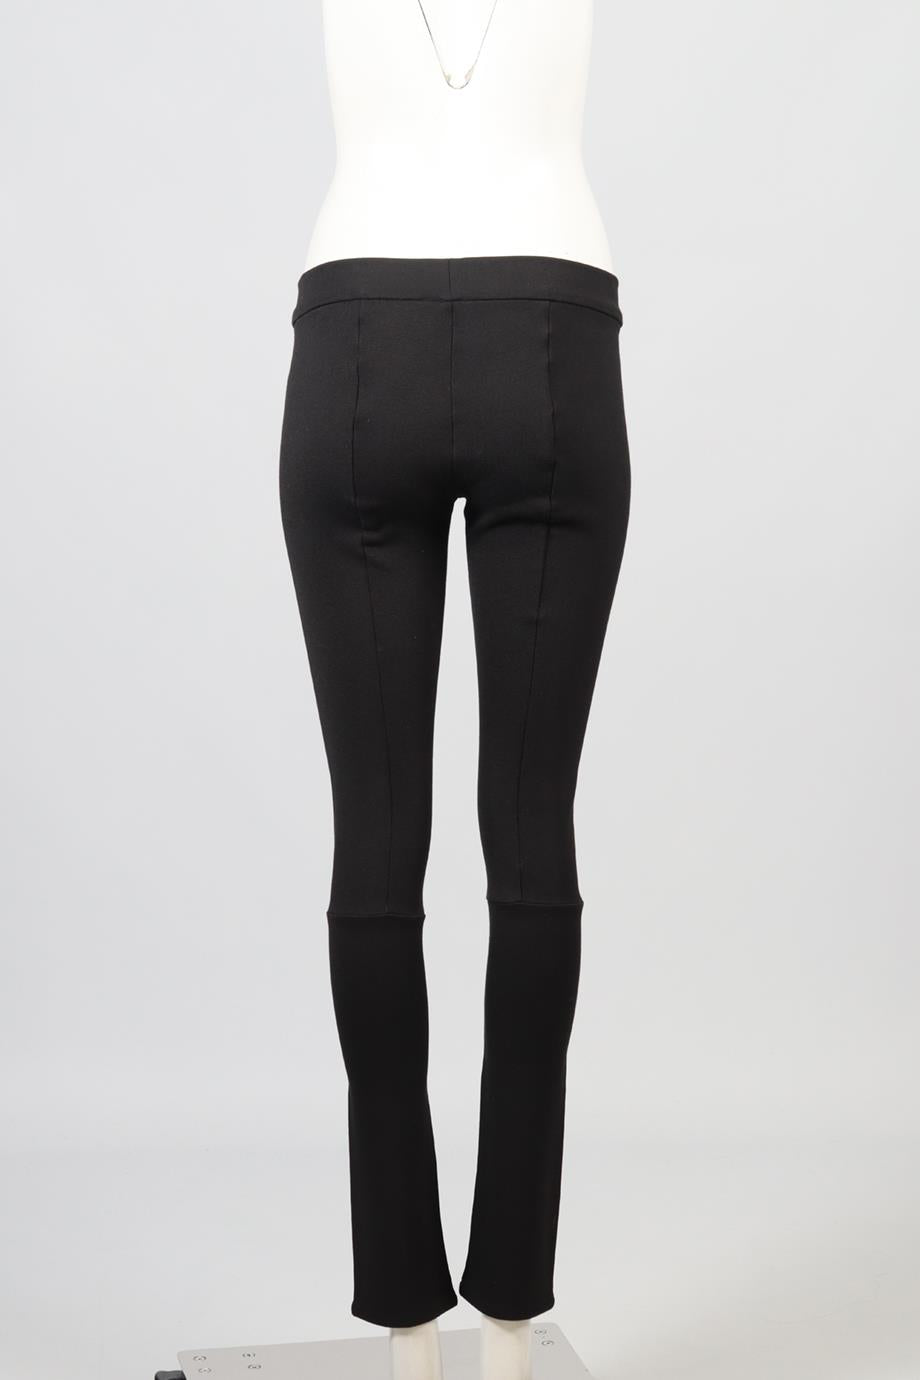 THE ROW COTTON BLEND LEGGINGS SMALL